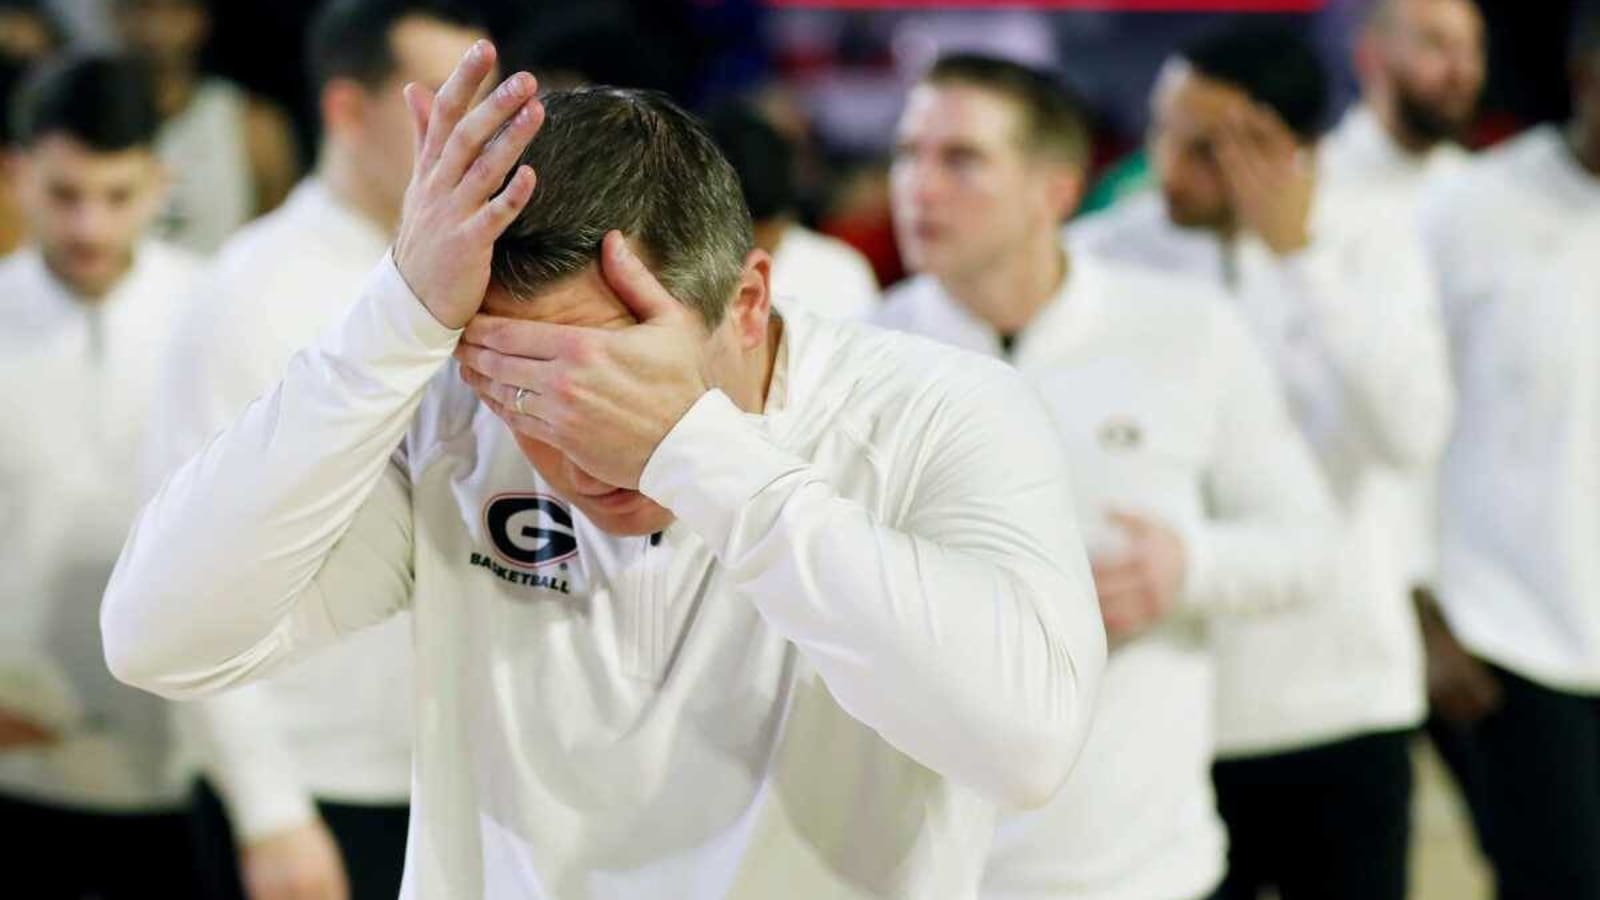 Georgia Loses 6th Straight After Being up Double-Digits